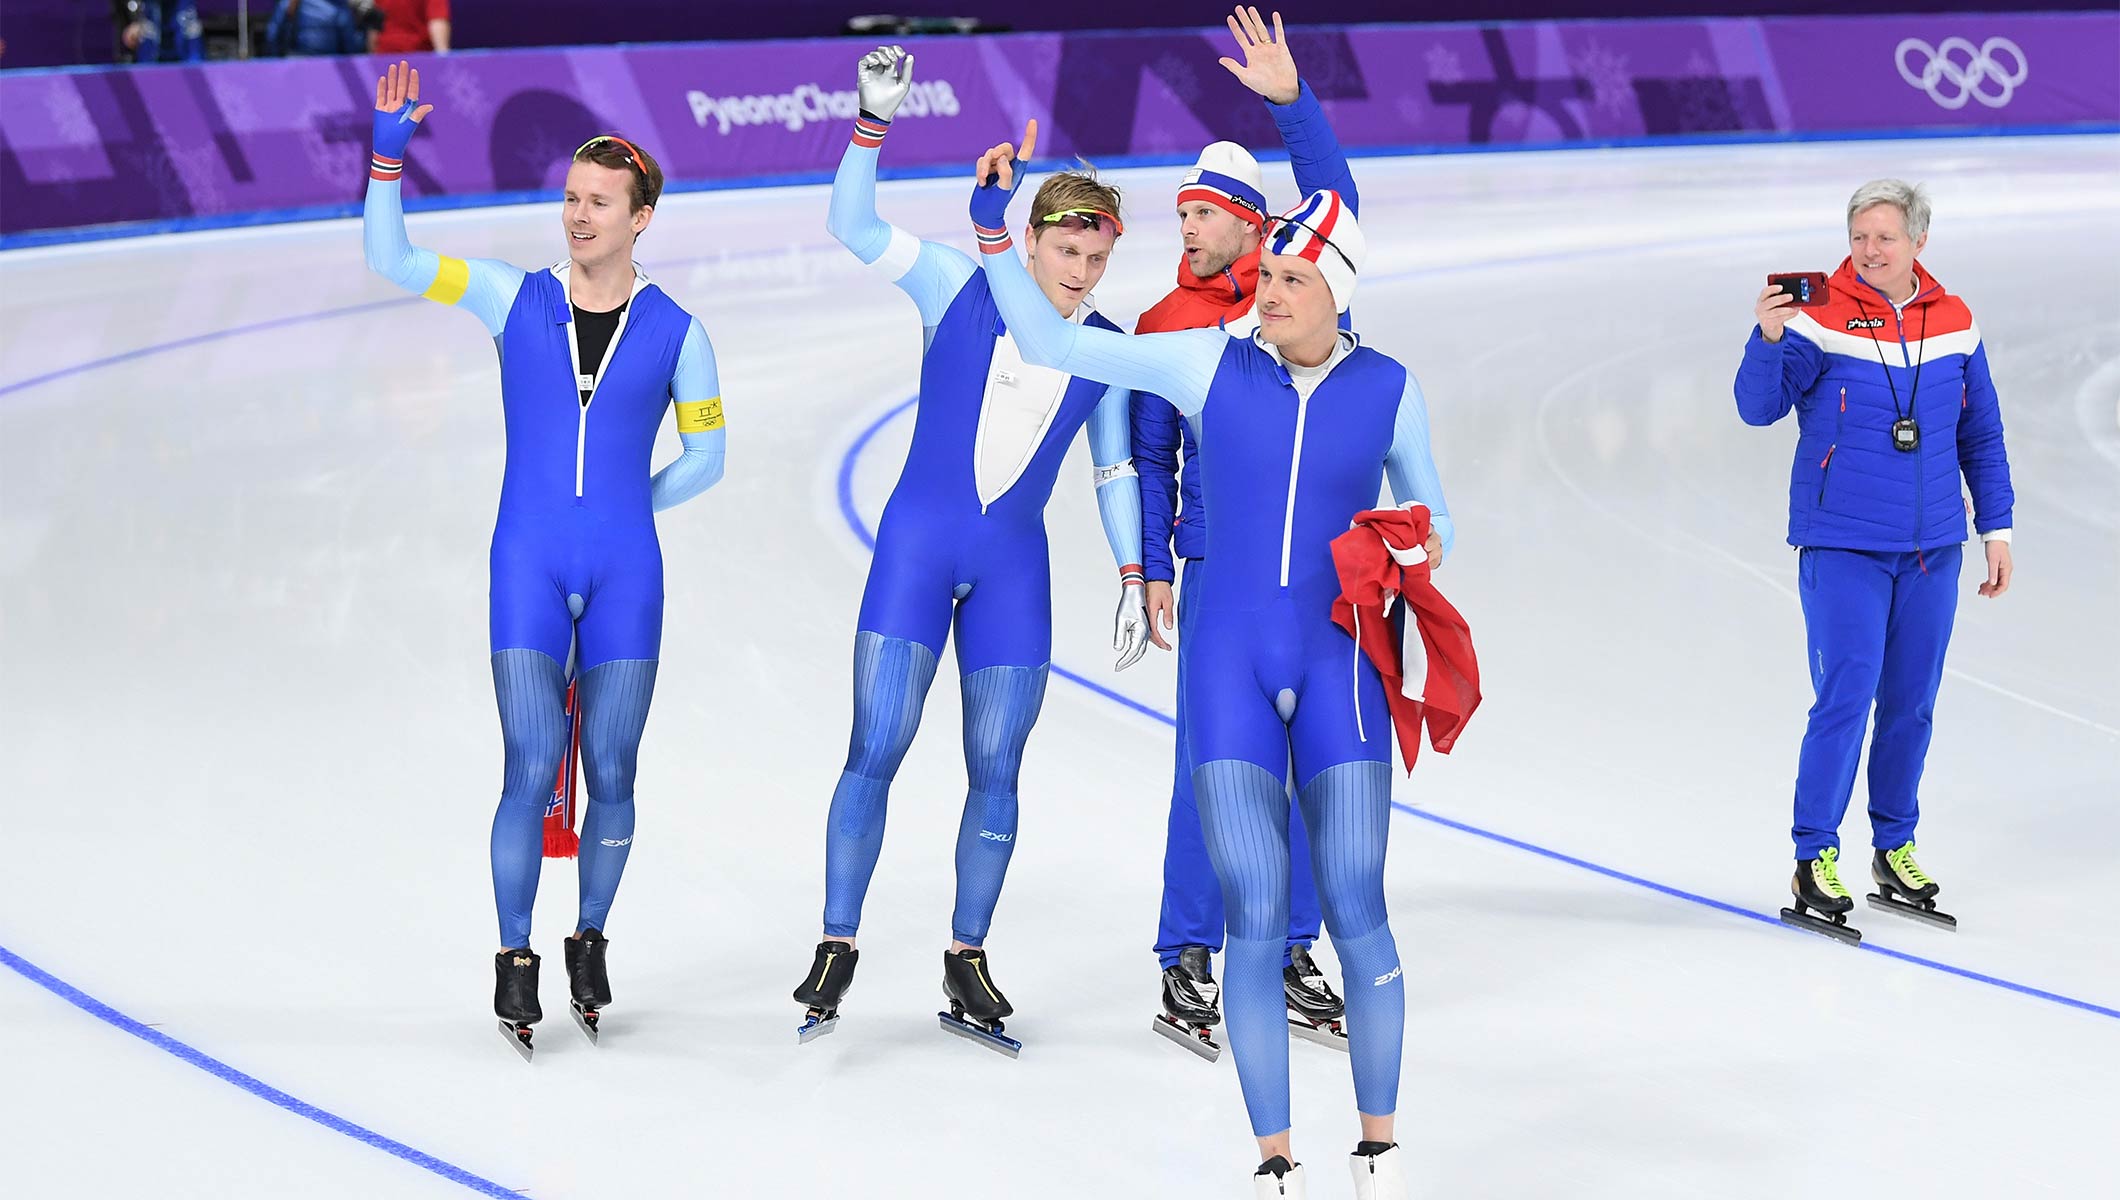 Speed skating rivals Kodaira and Lee put friendship first - Olympic News